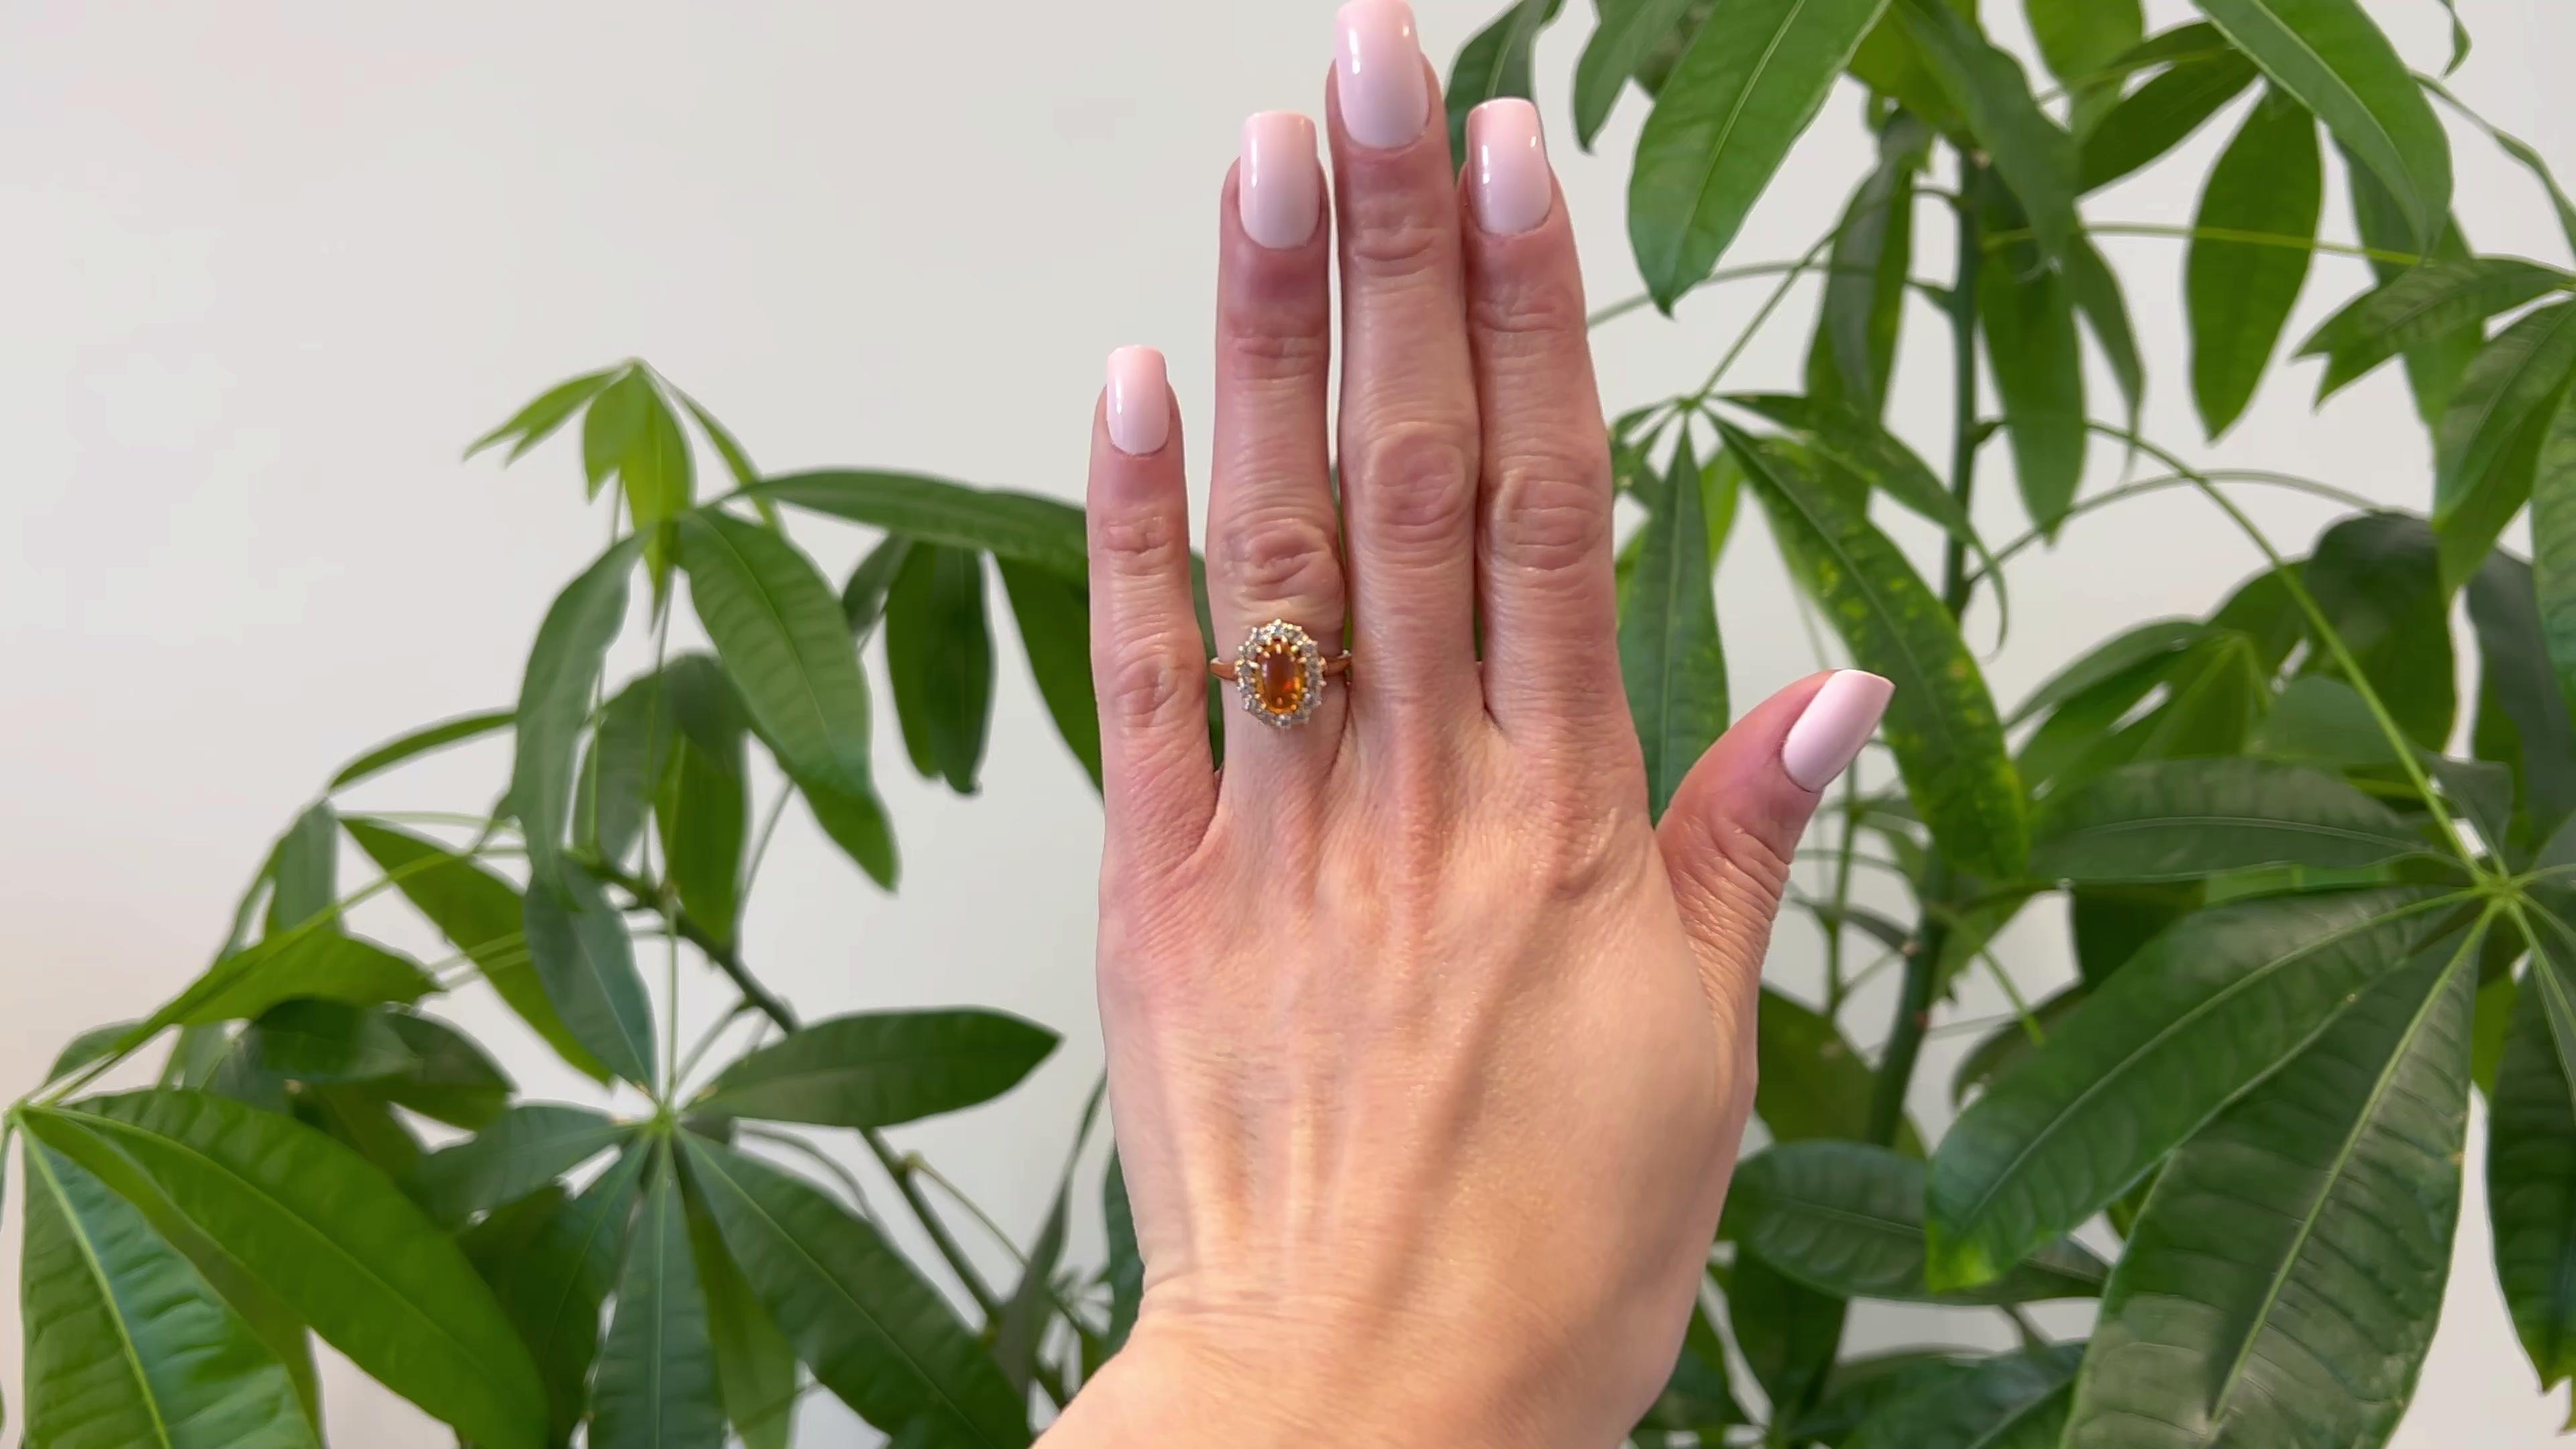 One Edwardian Fire Opal Diamond 14k Rose Gold Cluster Ring. Featuring one cabochon fire opal weighing approximately 1.30 carats. Accented by 14 old European cut diamonds with a total weight of approximately 0.65 carat, graded I color, SI clarity.